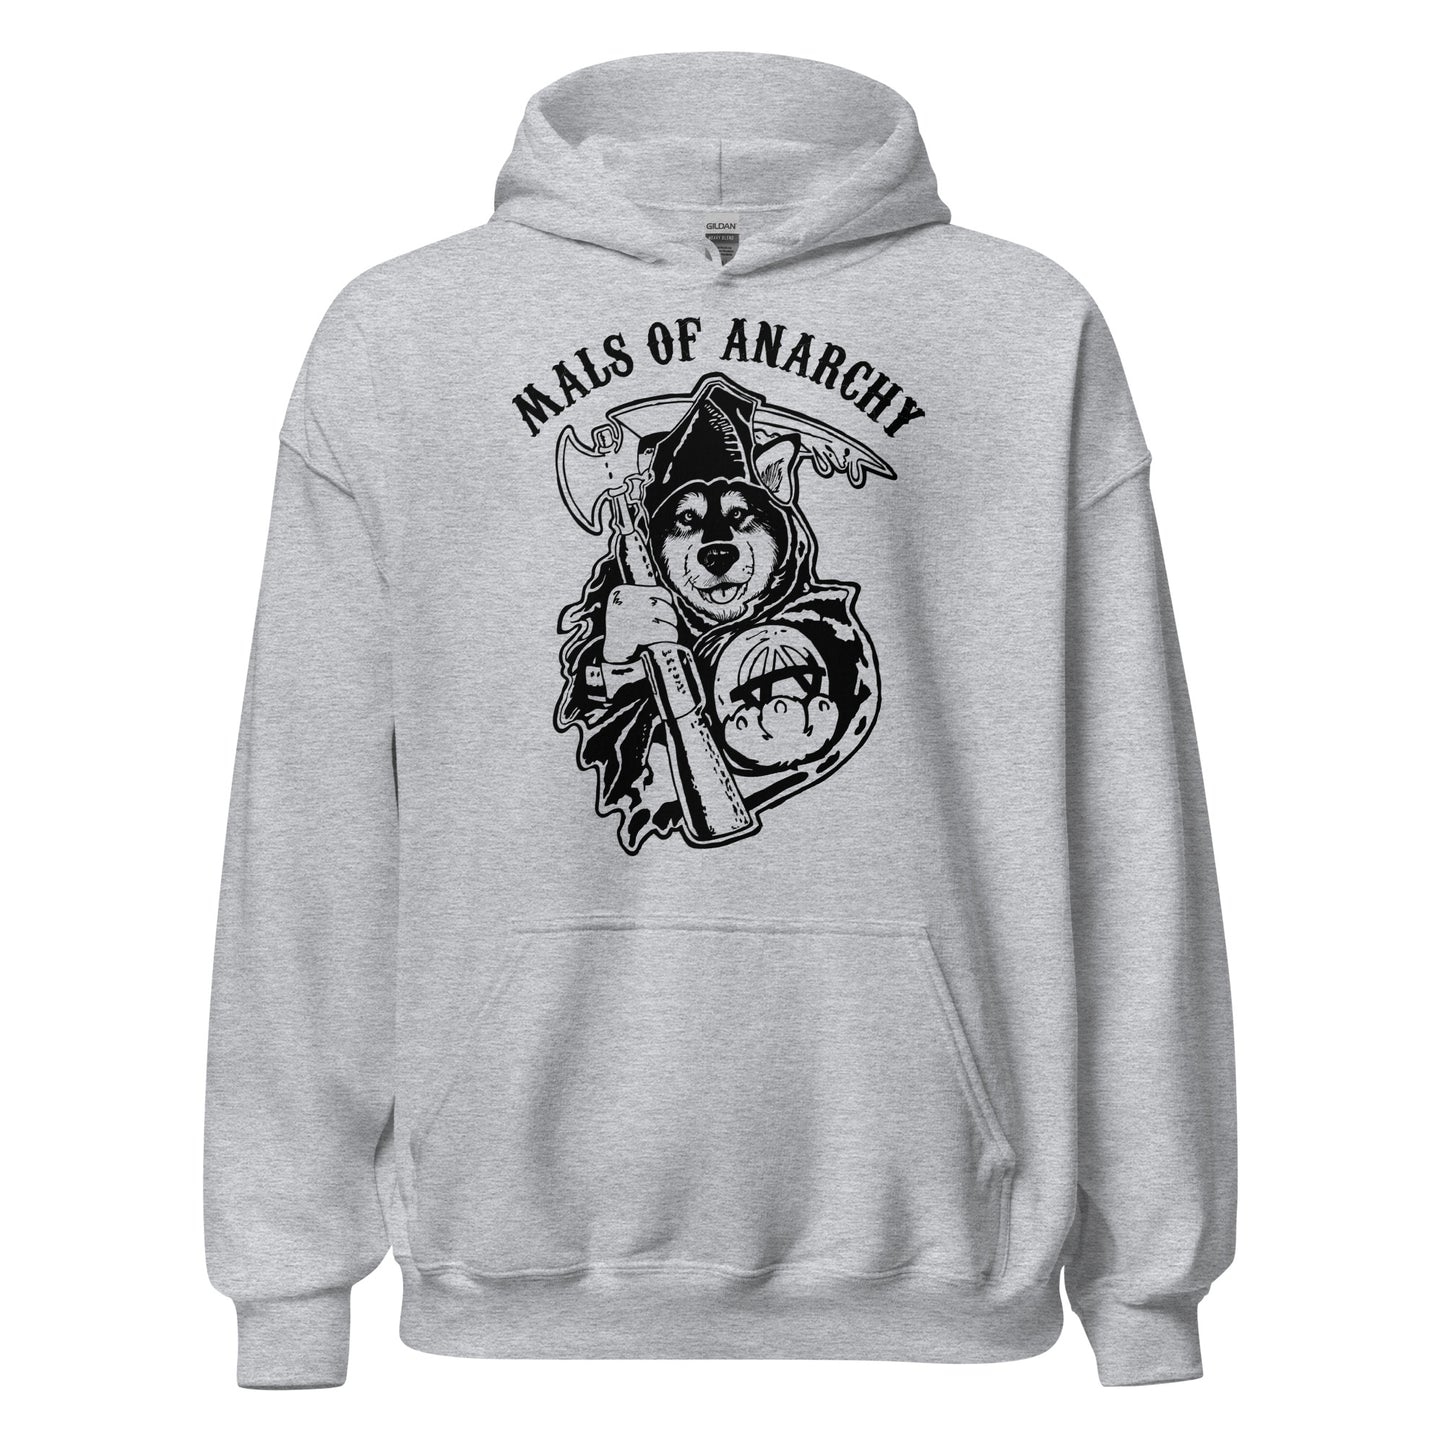 Mals of Anarchy - Pullover Hoodie